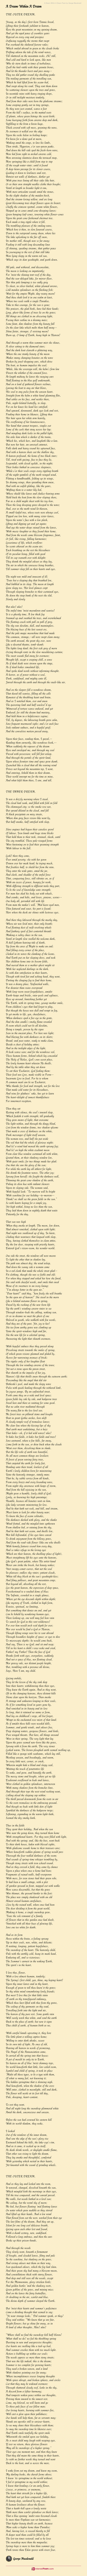 A Dream Within A Dream Poem By George Macdonald